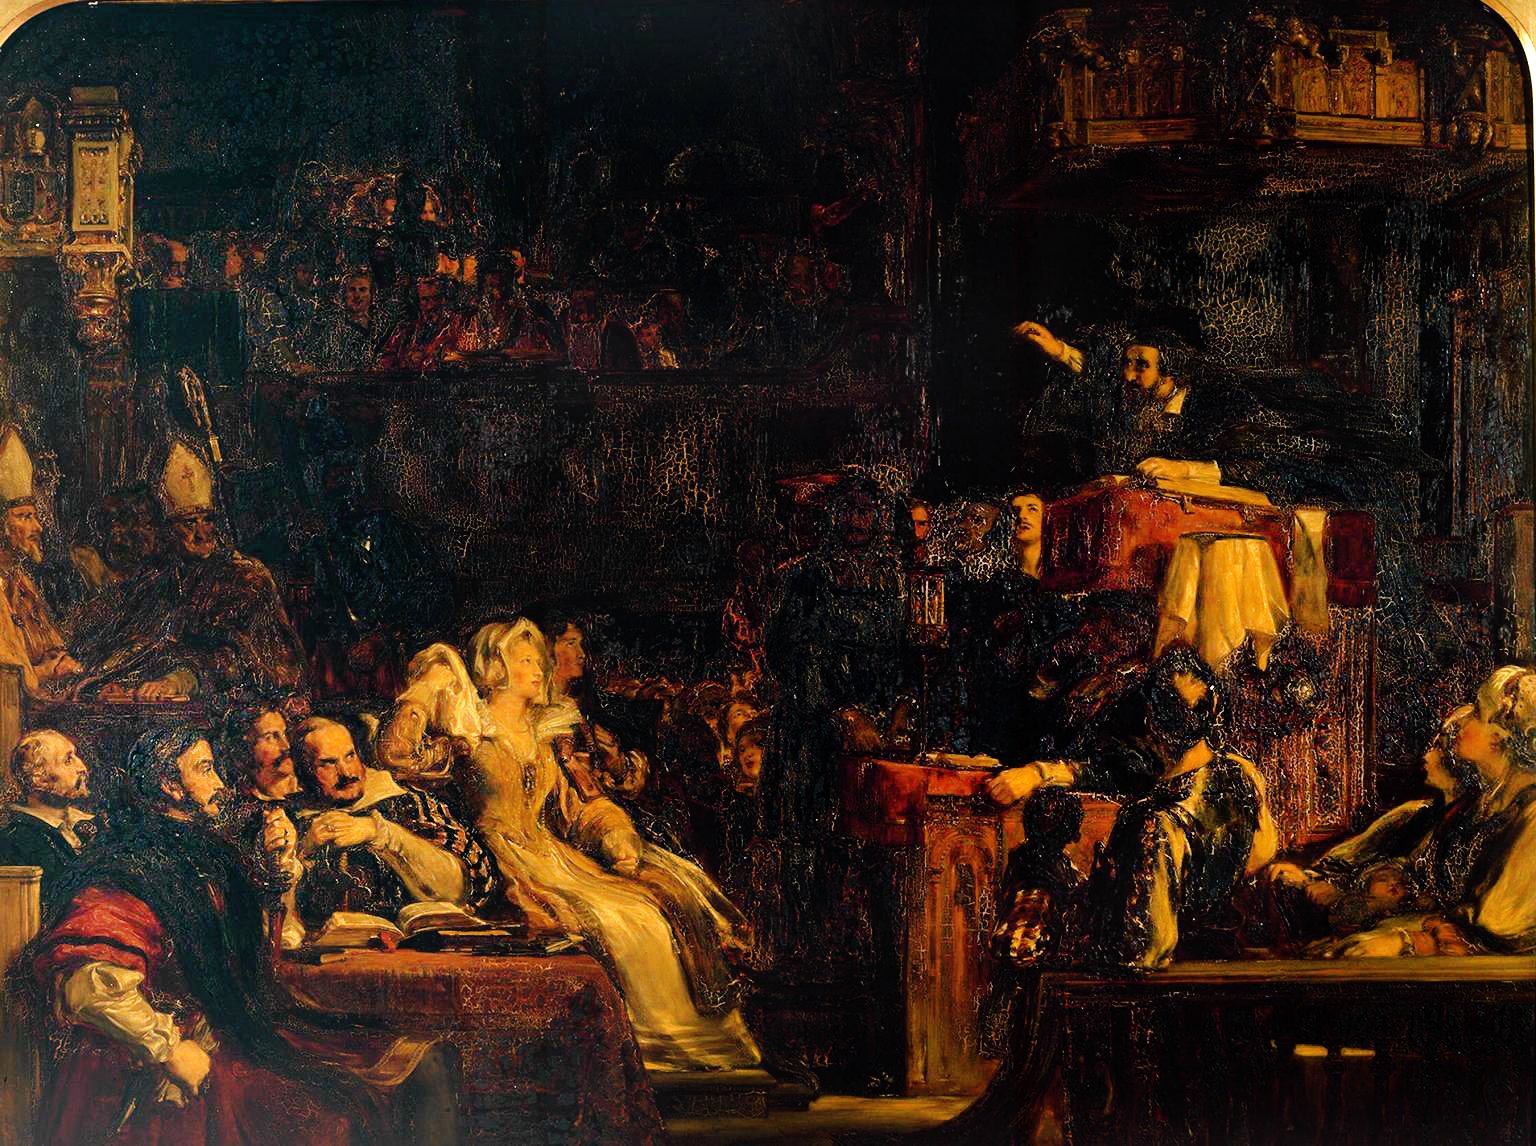 Painting 'The Preaching of Knox' depicting a dimly lit, crowded room with individuals in historical attire. In the center, John Knox, wearing a black robe, stands elevated on a platform passionately addressing the audience.